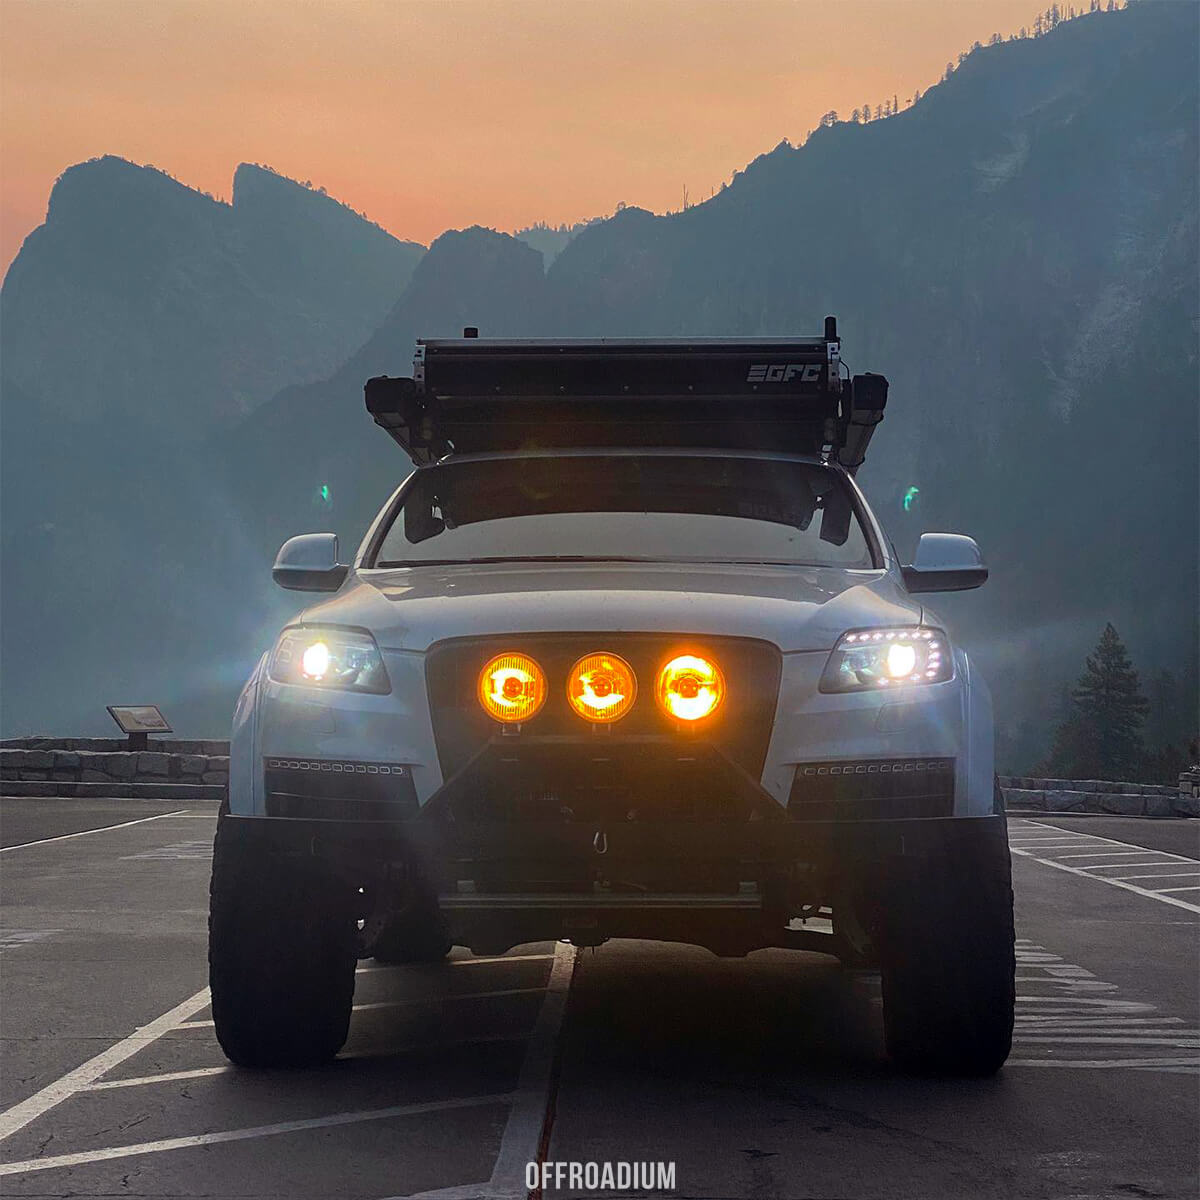 Audi Q7 custom prerunner style offroad bumper with a skid plate and LED lights